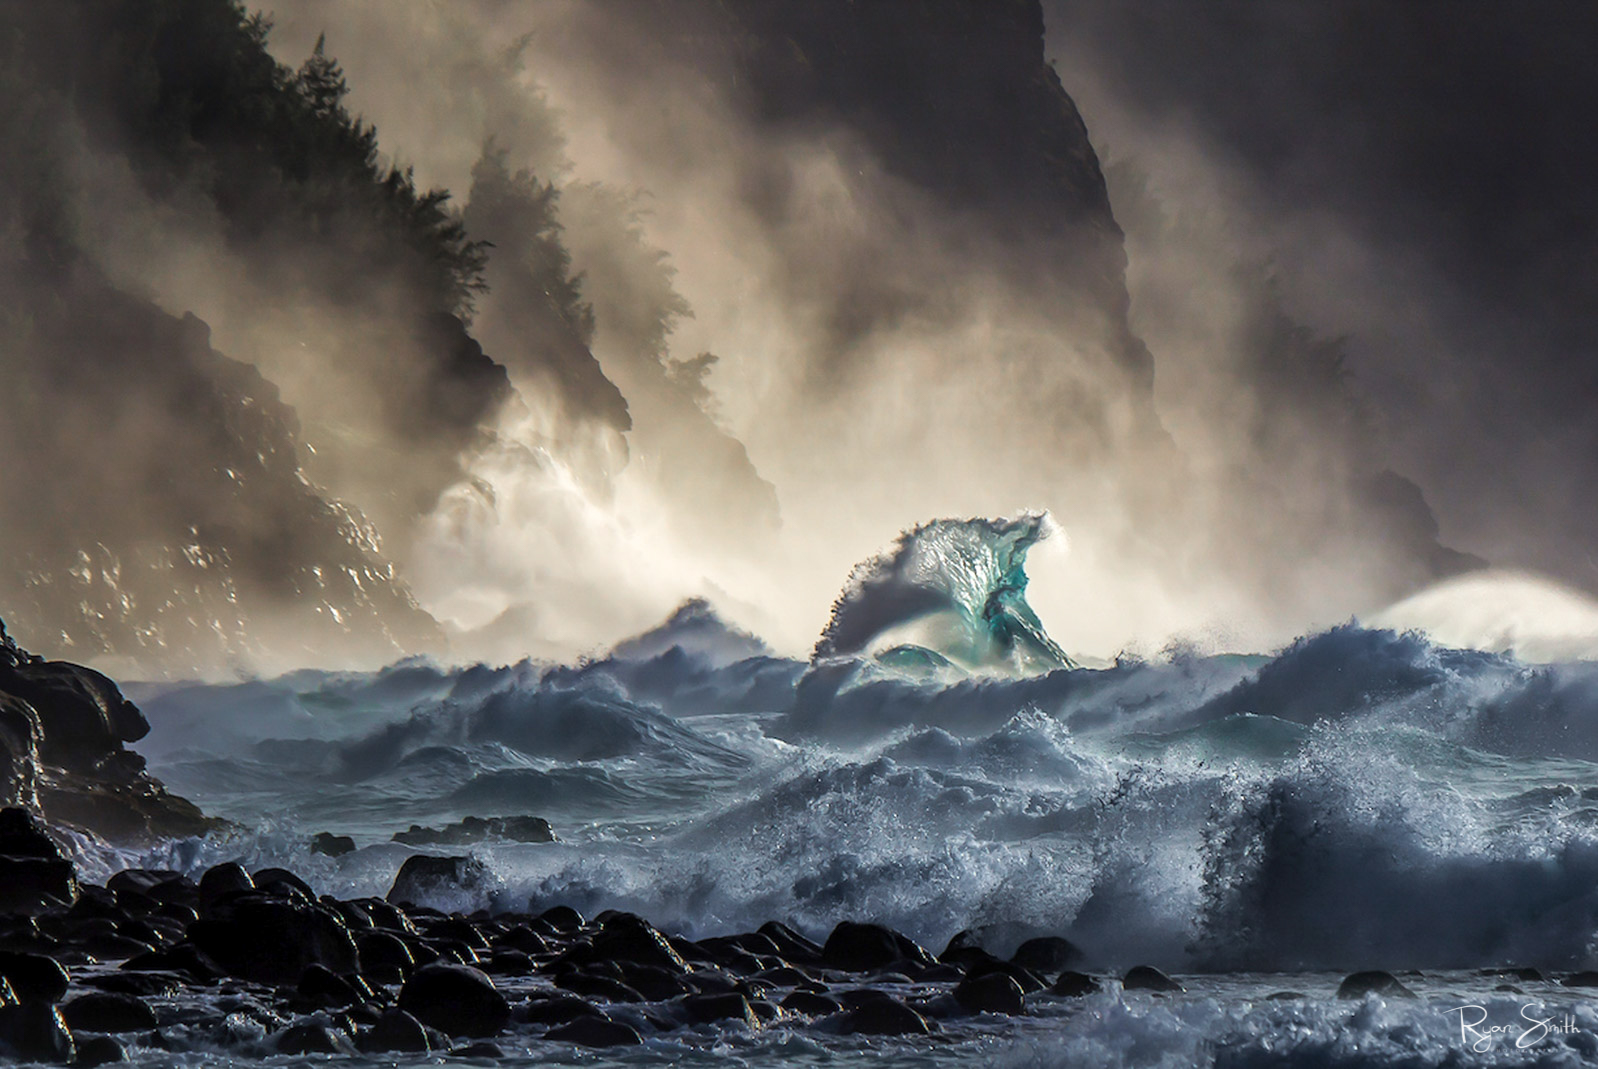 Waves crash into a rocky beach while mist and fog fill the air in this stormy scene.